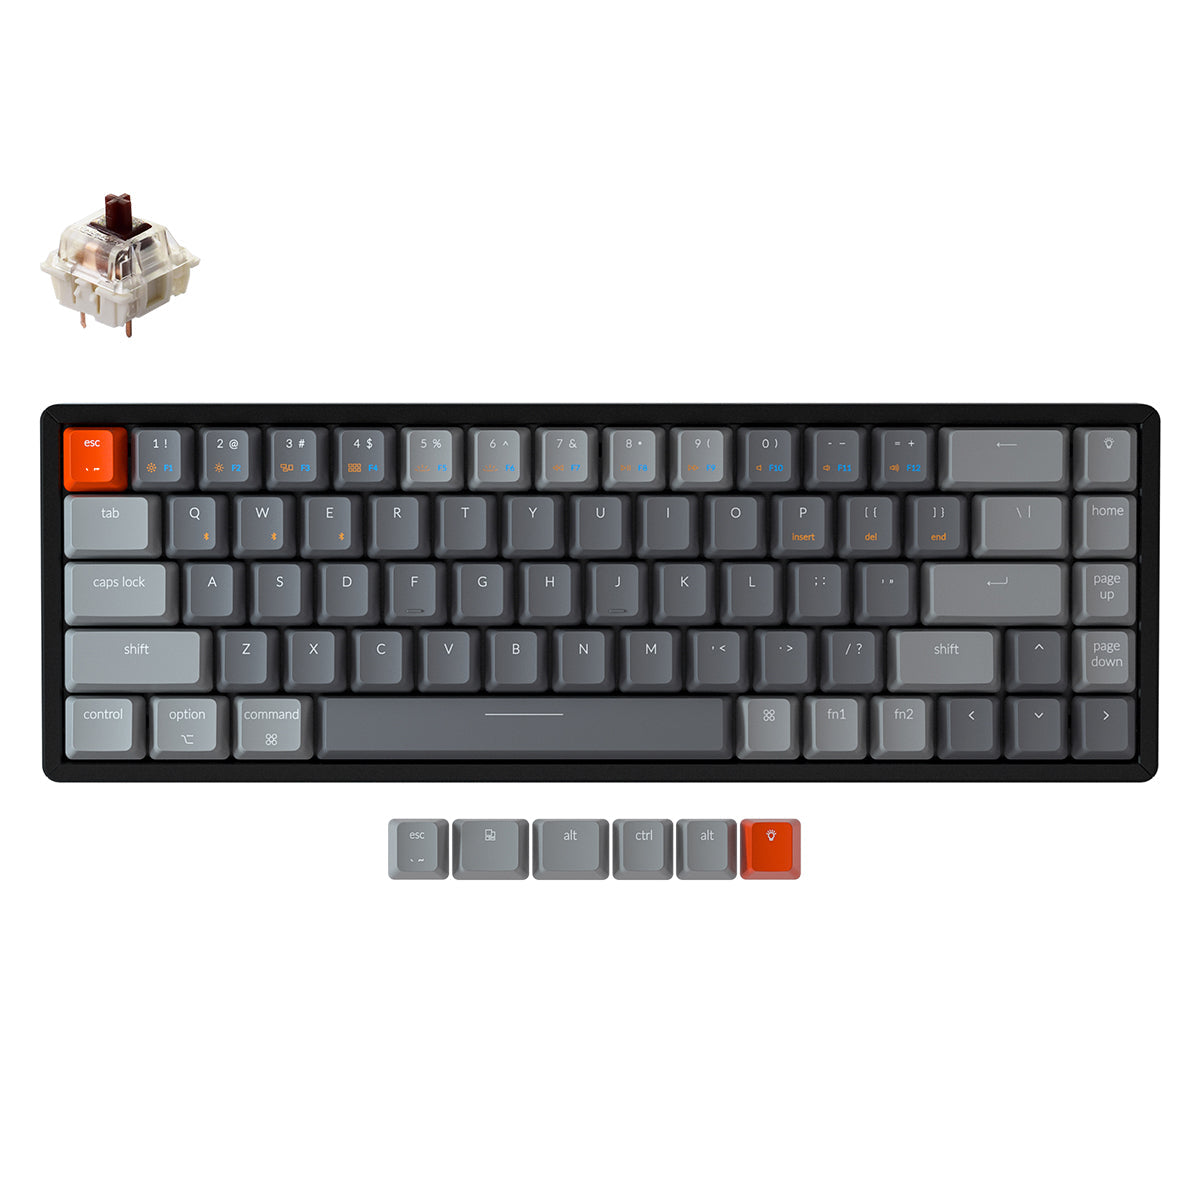 Keychron K6 hot-swappable compact 65% wireless mechanical keyboard for Mac Windows iOS Gateron switch brown with type-C RGB white backlight aluminum frame